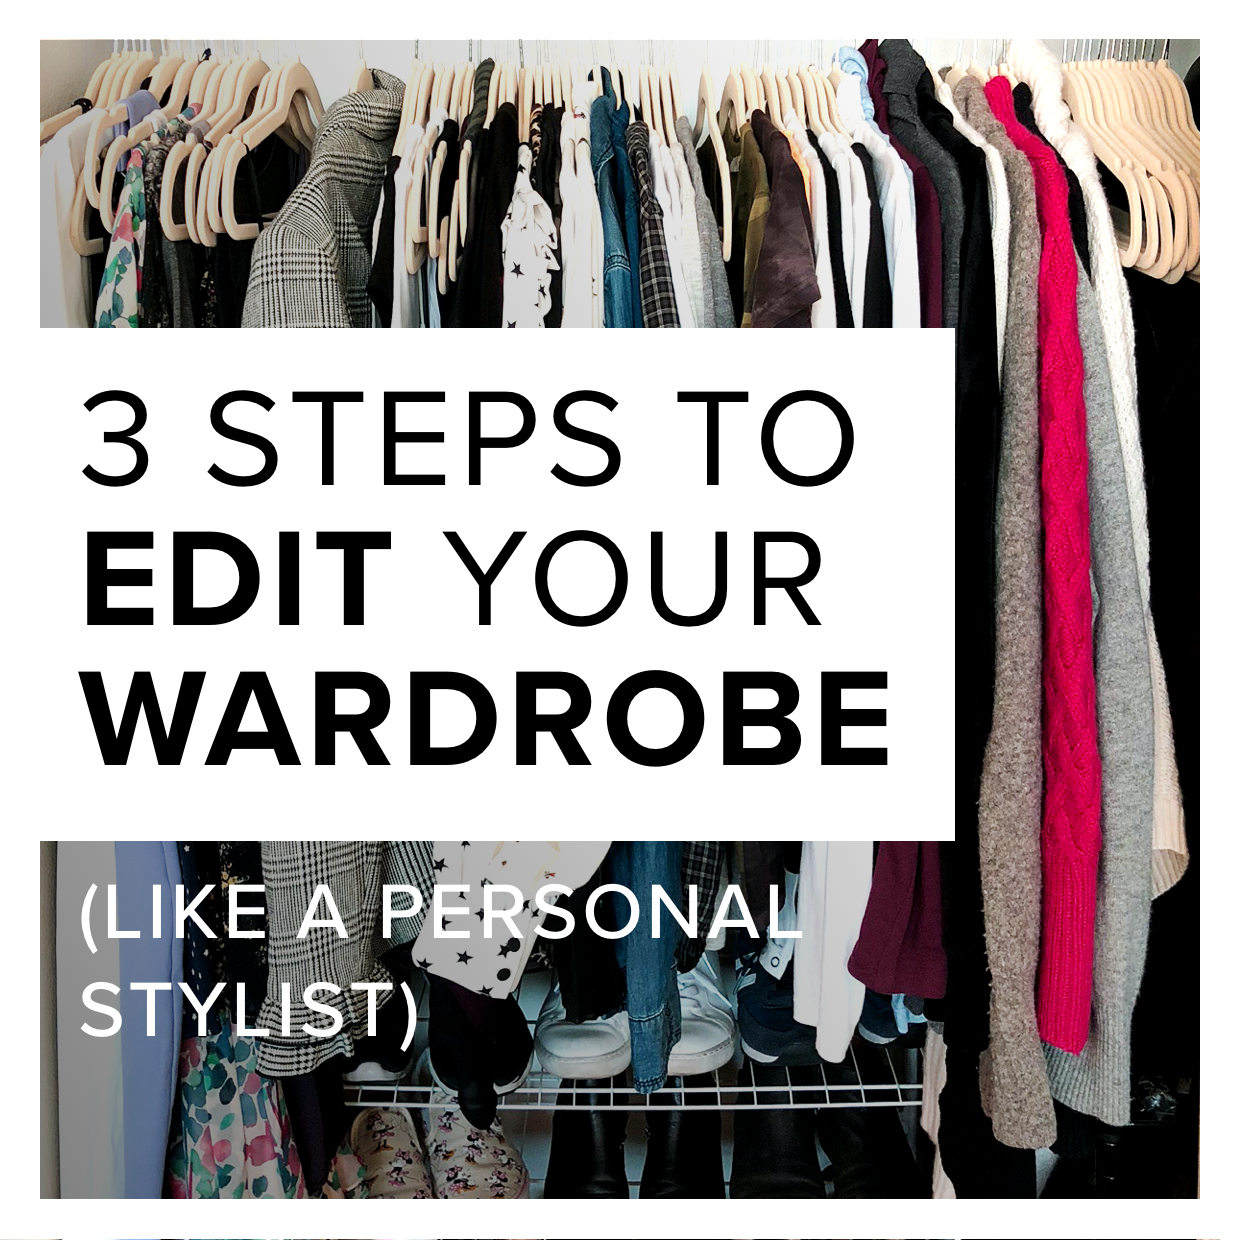 Build your Wardrobe like a personal stylist in 3 Steps